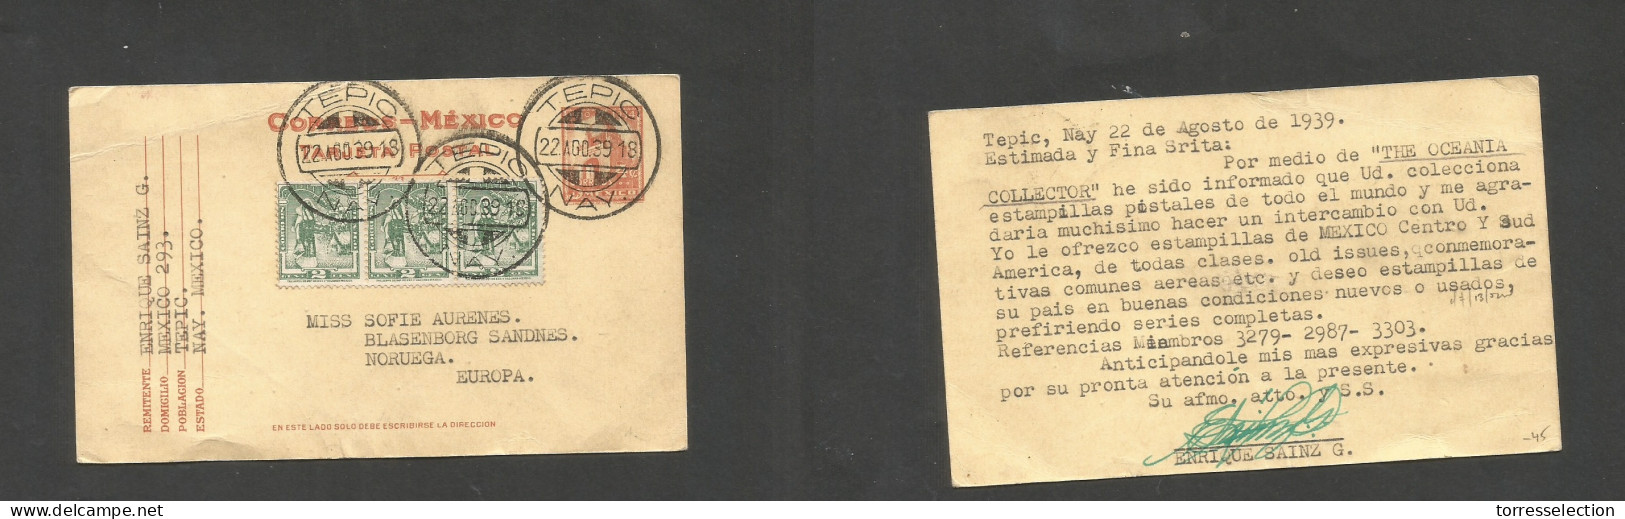 MEXICO - Stationery. 1939 (22 Aug) Tepic, Nay - Norway, Blasenborg. 4c Red Stat Card + 3 Adtls, At 10c Rate, Tied Cds. X - México